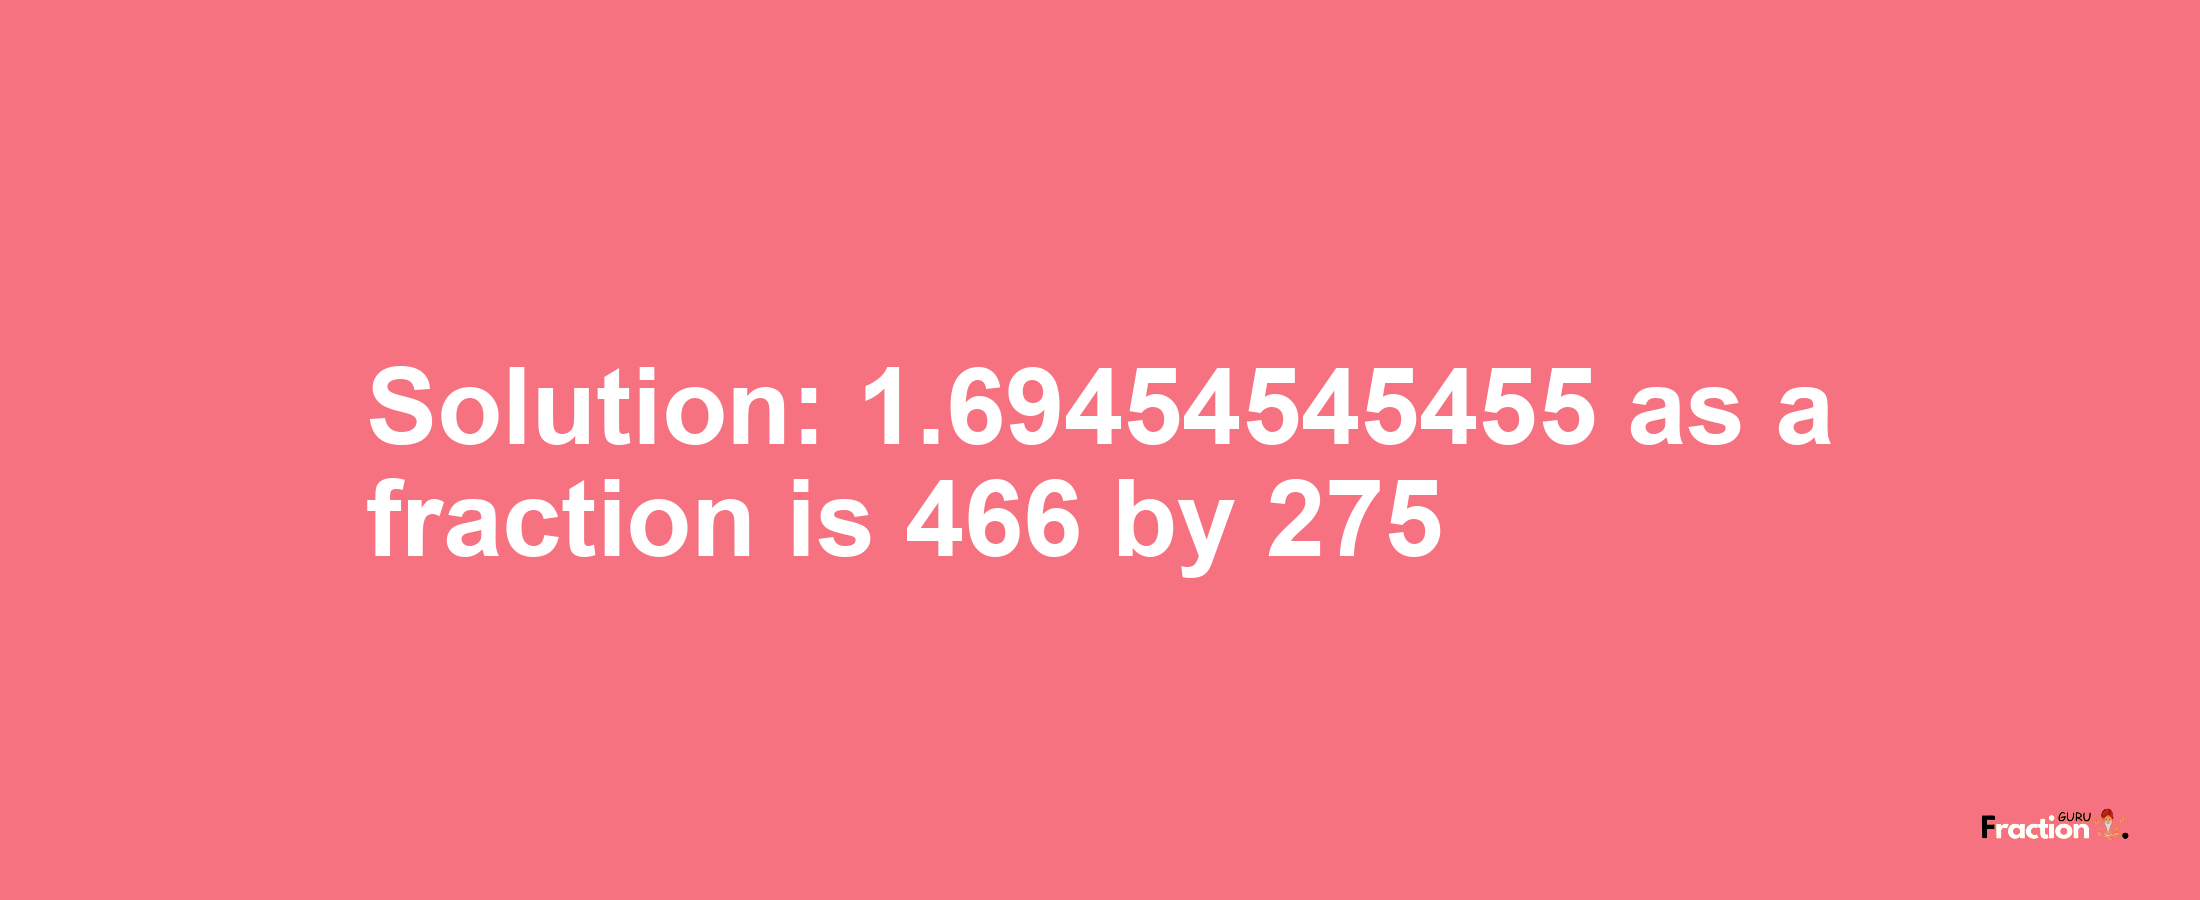 Solution:1.69454545455 as a fraction is 466/275